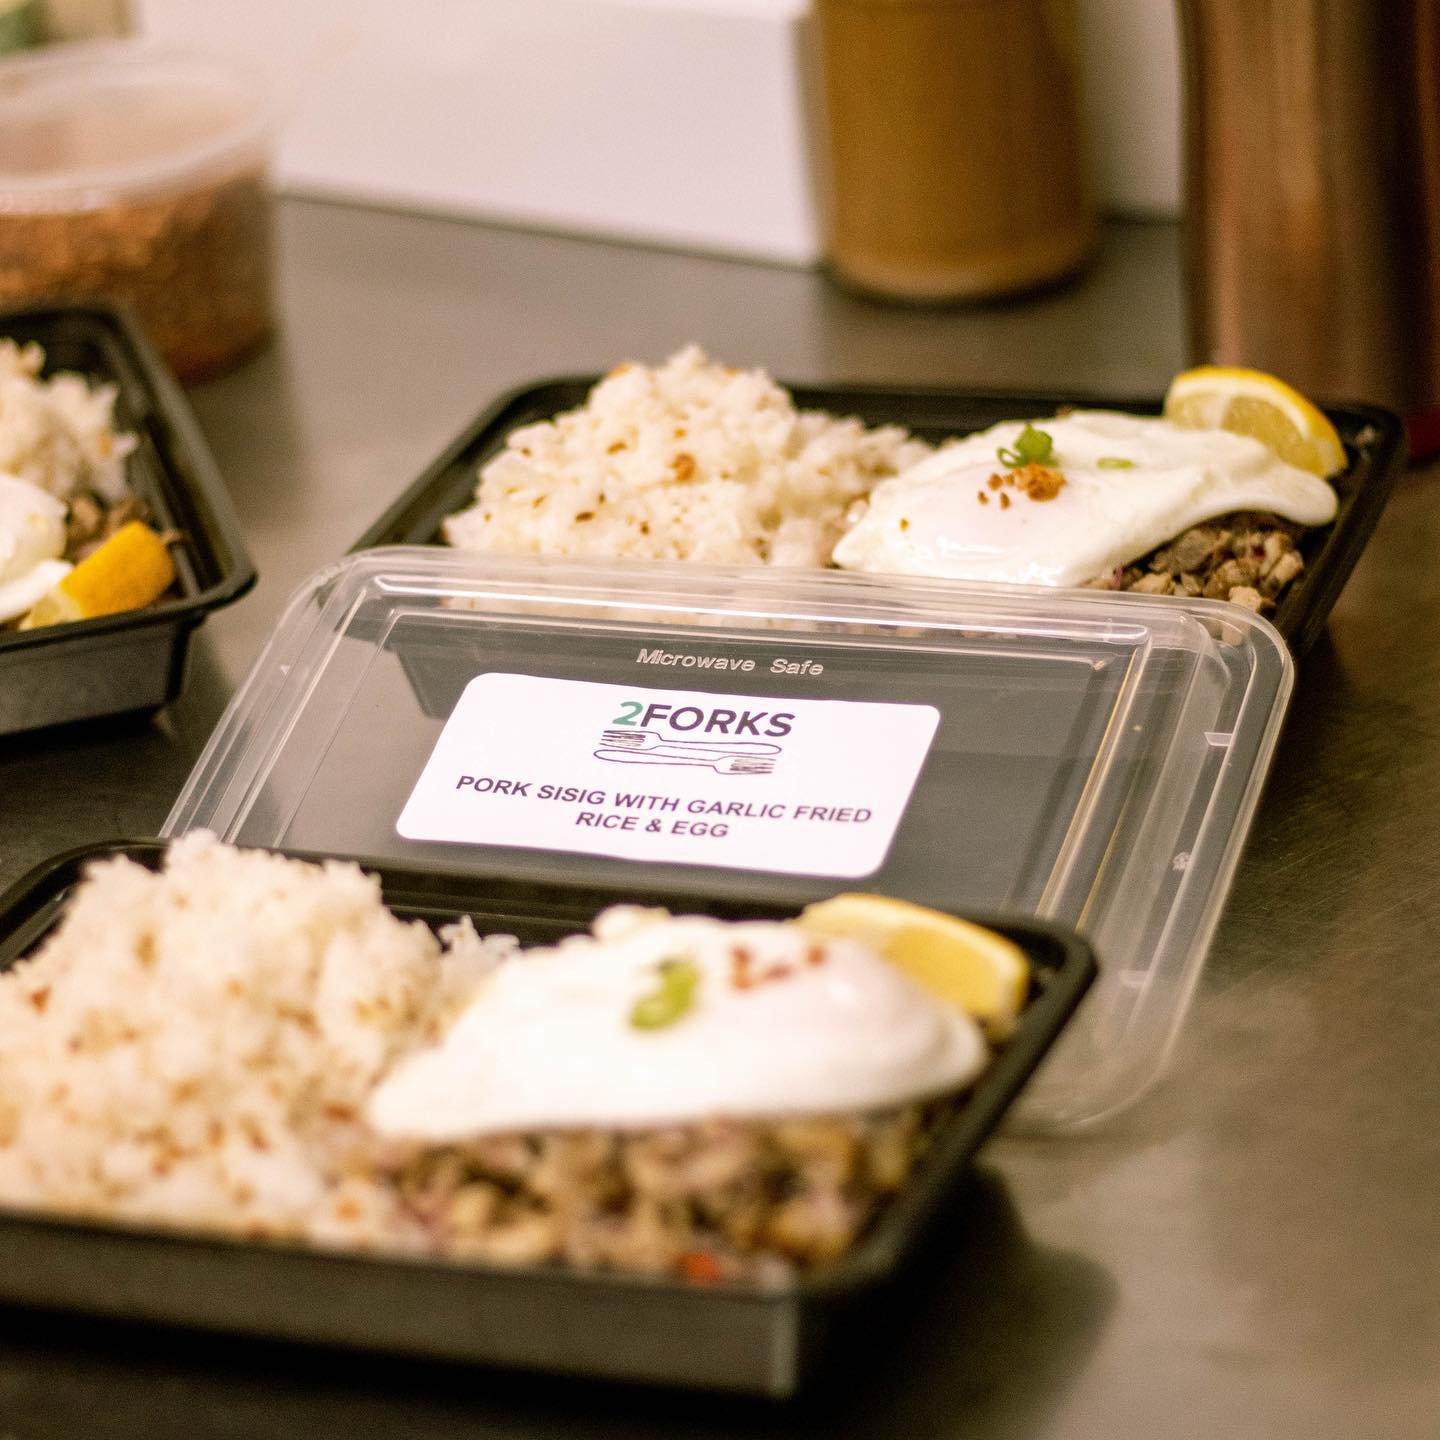 You probably haven't heard of 2forks, but we've been serving thousands of lunches to startups and corporates all over the Bay Area weekly for the past 6 years. Now we want to bring the same homemade and delicious food to your home. Check us out at ge